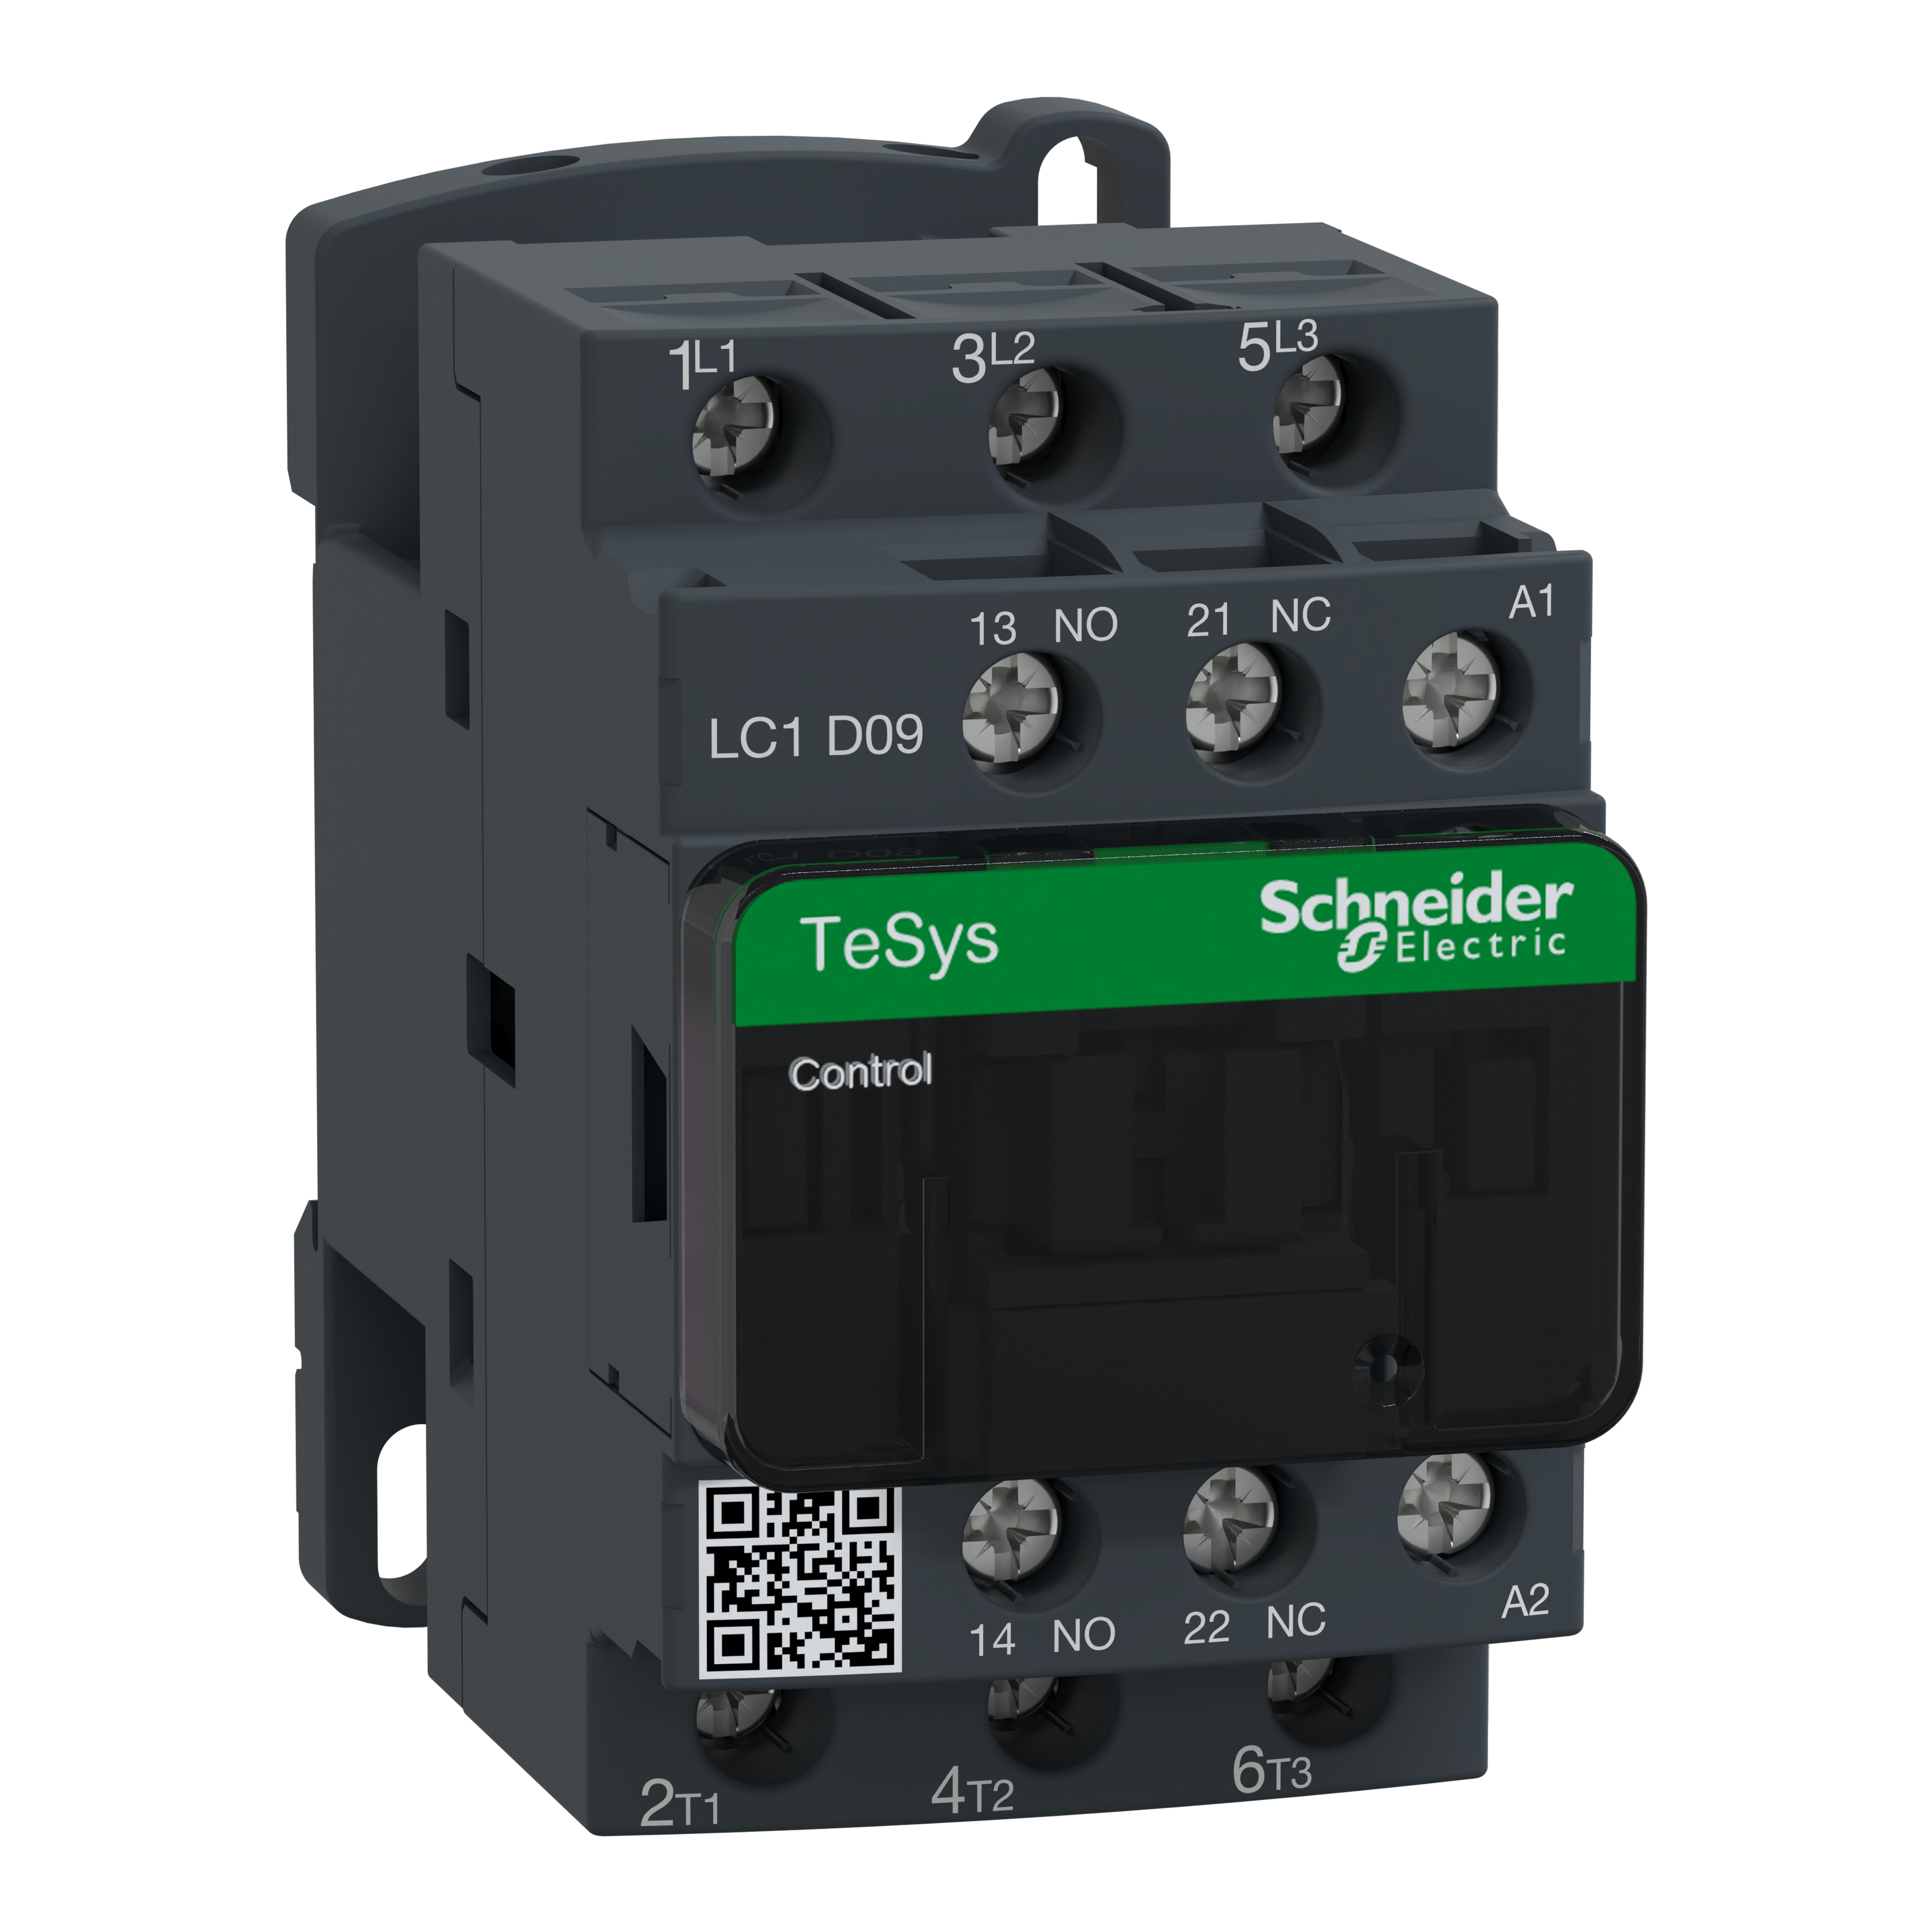 IEC contactor, TeSys Deca, nonreversing, 9A, 5HP at 480VAC, up to 100kA SCCR, 3 phase, 3 NO, 600VAC 50/60Hz coil, open style